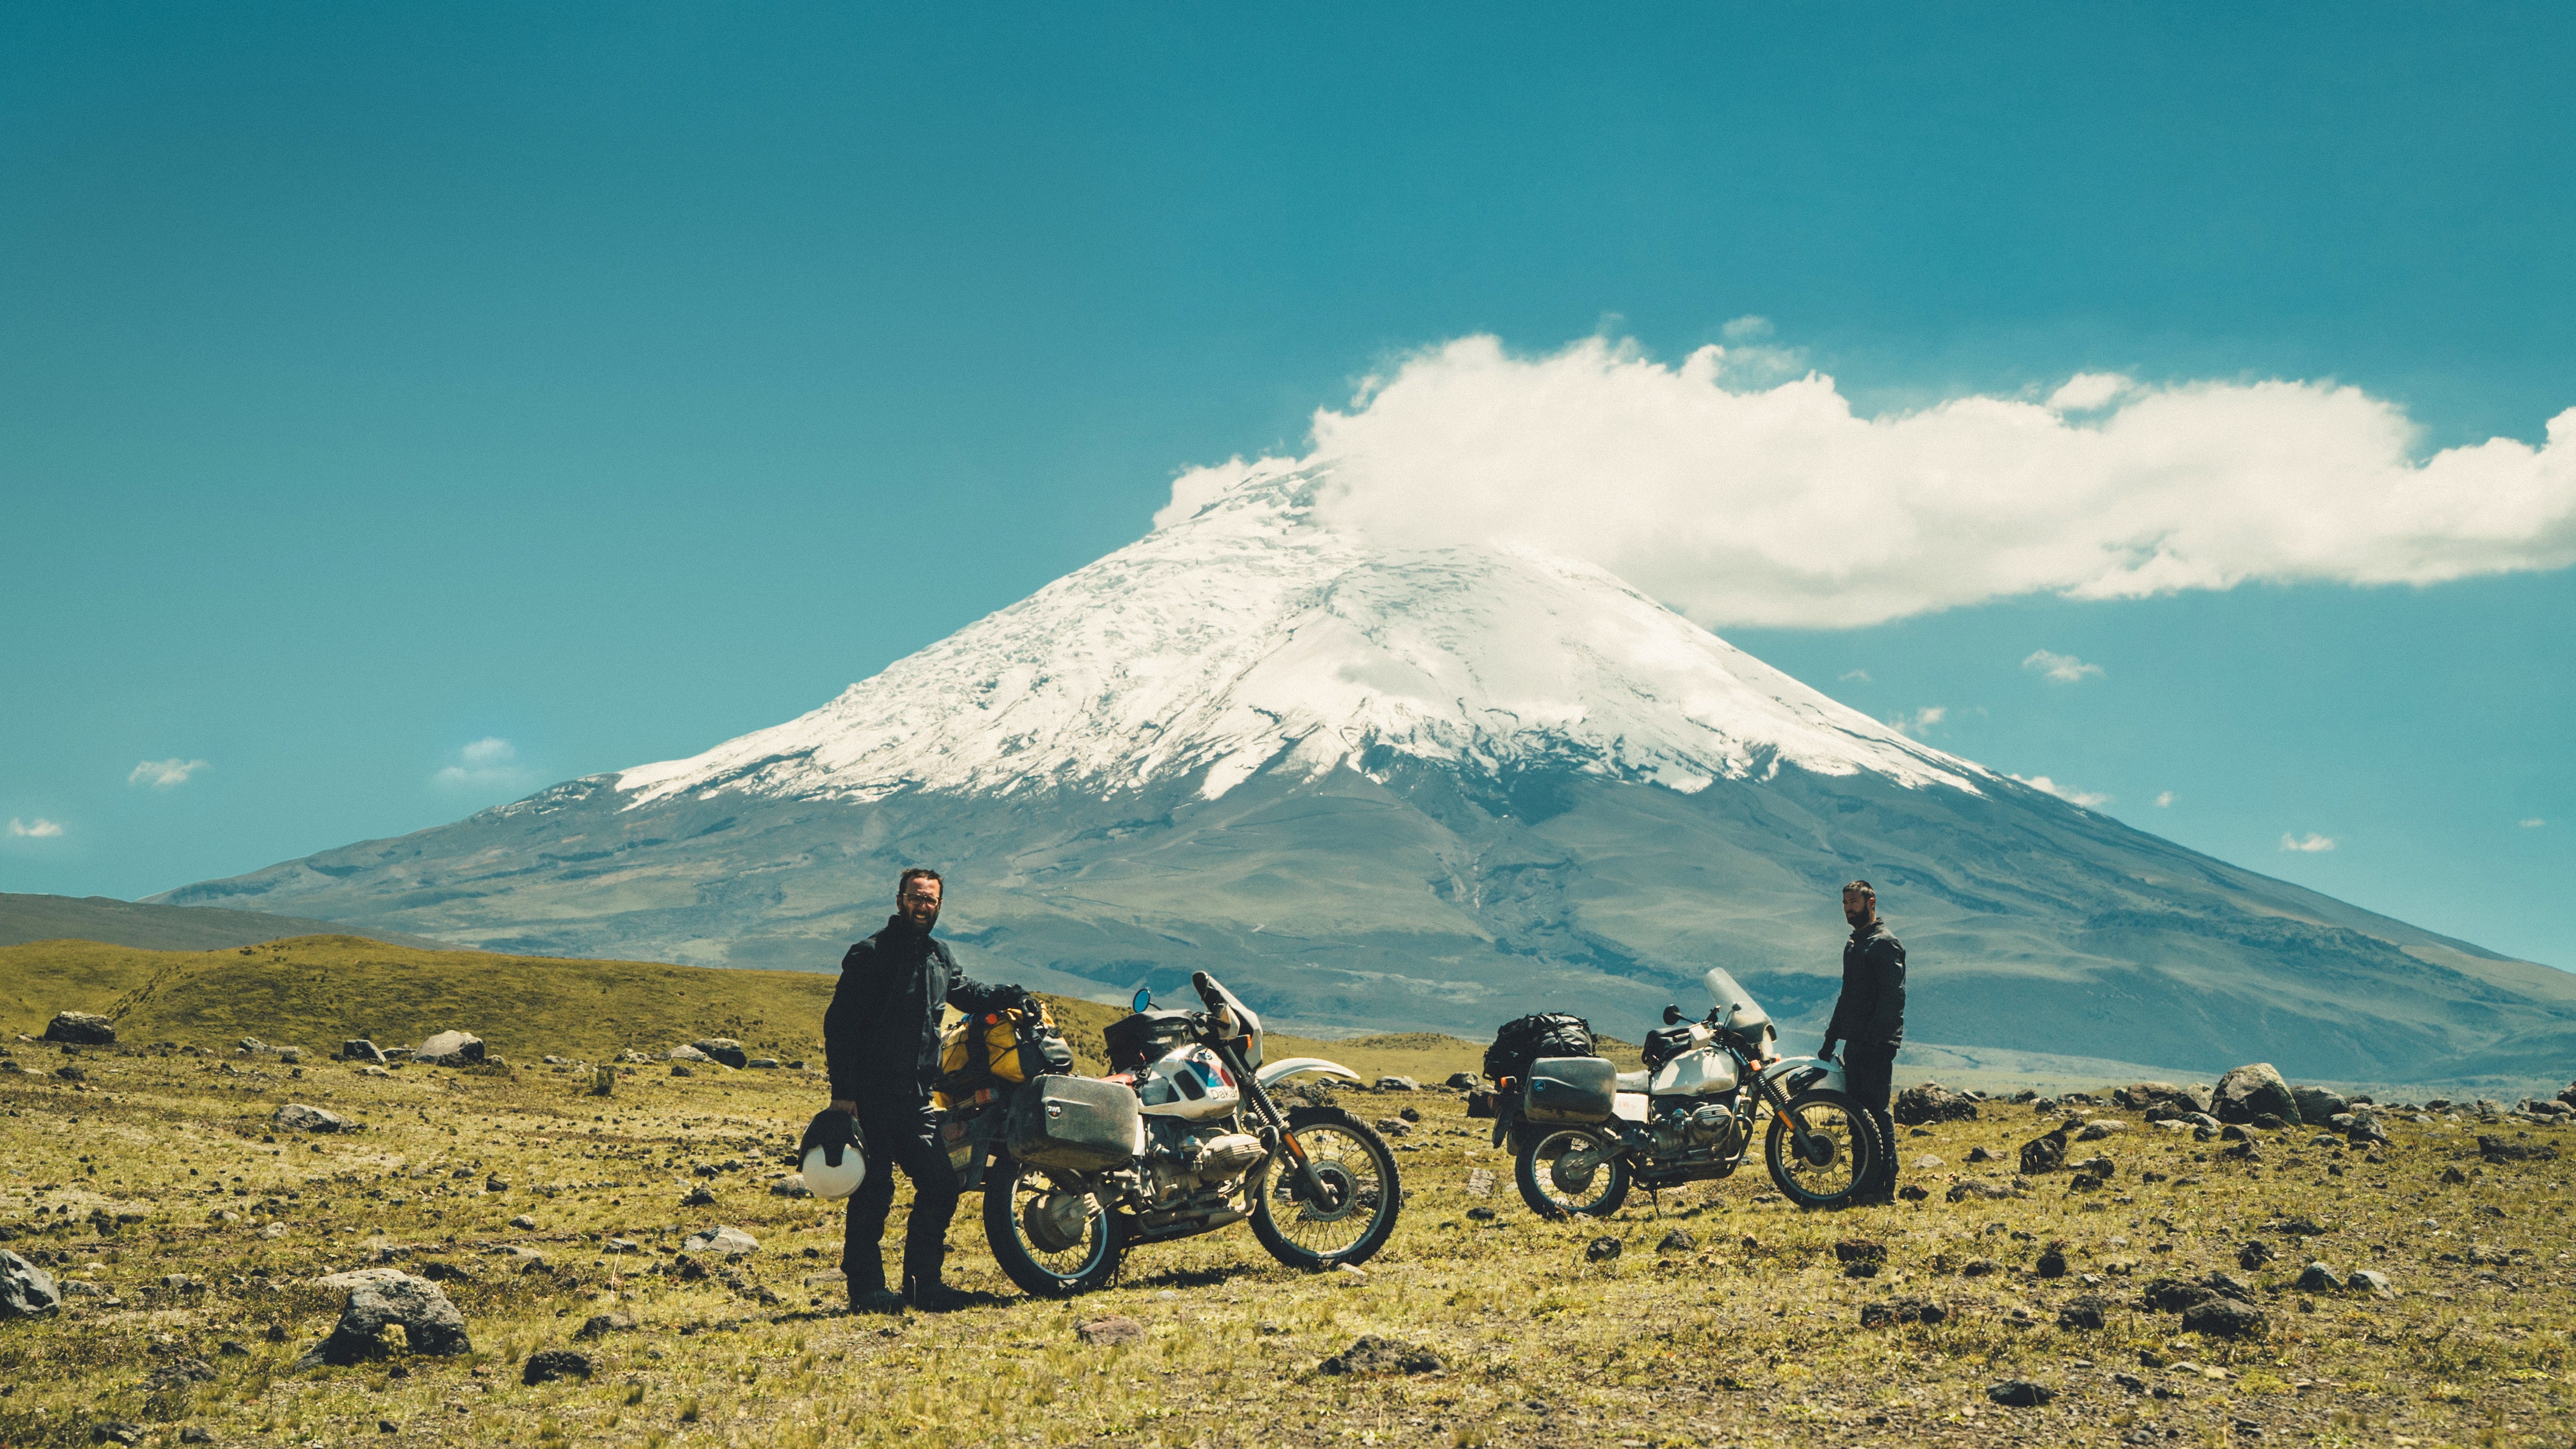 Corea and his bikes in front of Cotopaxi, a stratovolcano in the Andes Mountains, in Ecuador.